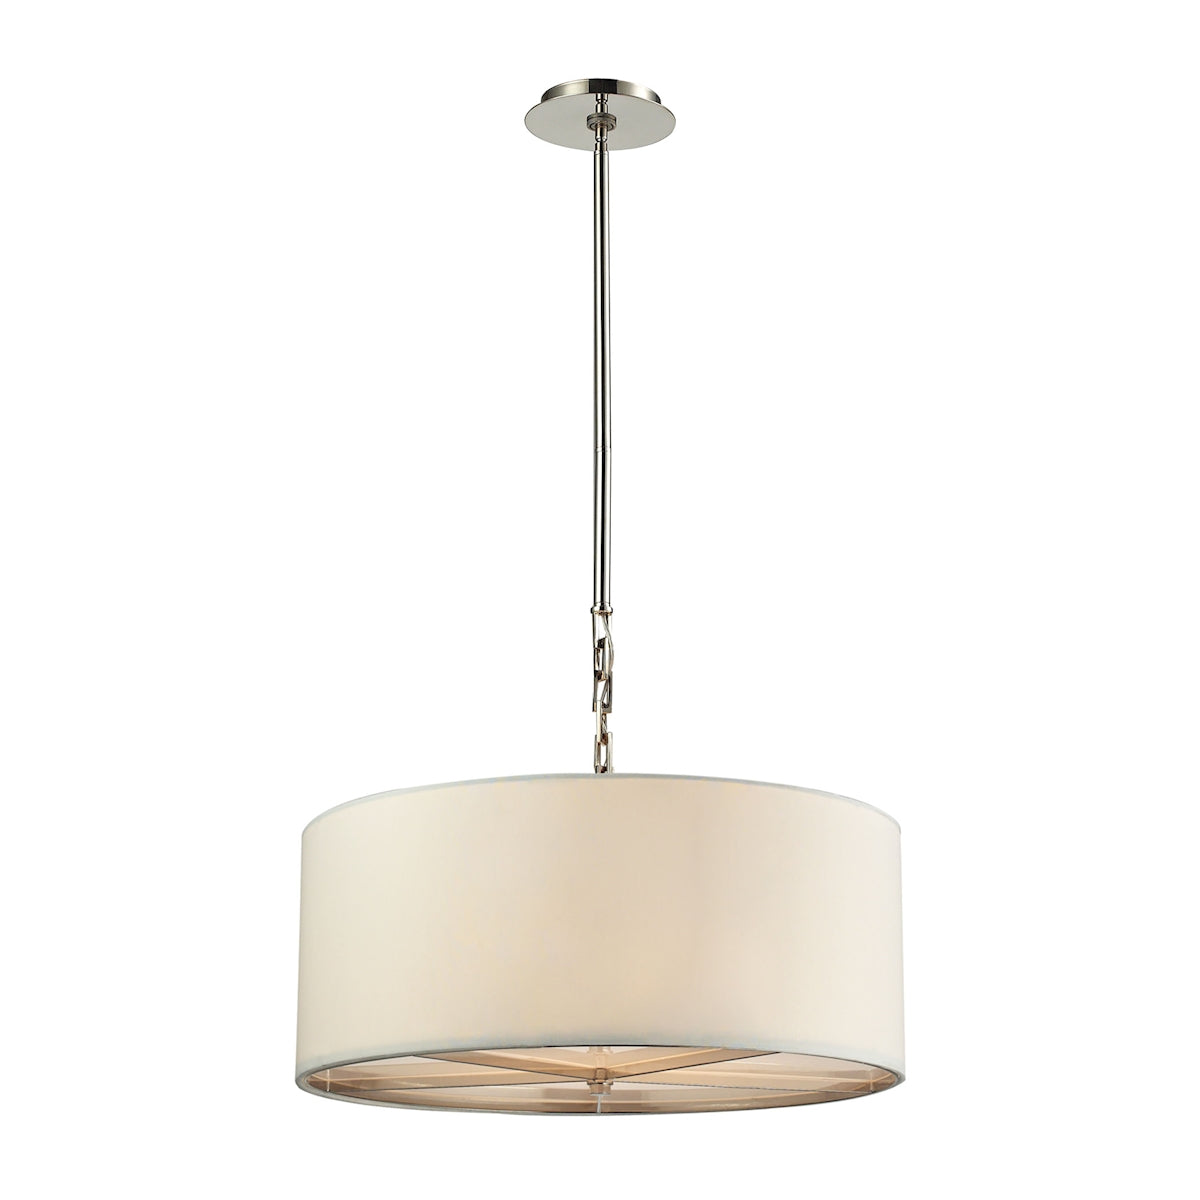 ELK Lighting 31651/5 Selma 5-Light Chandelier in Polished Nickel with White Fabric Shade